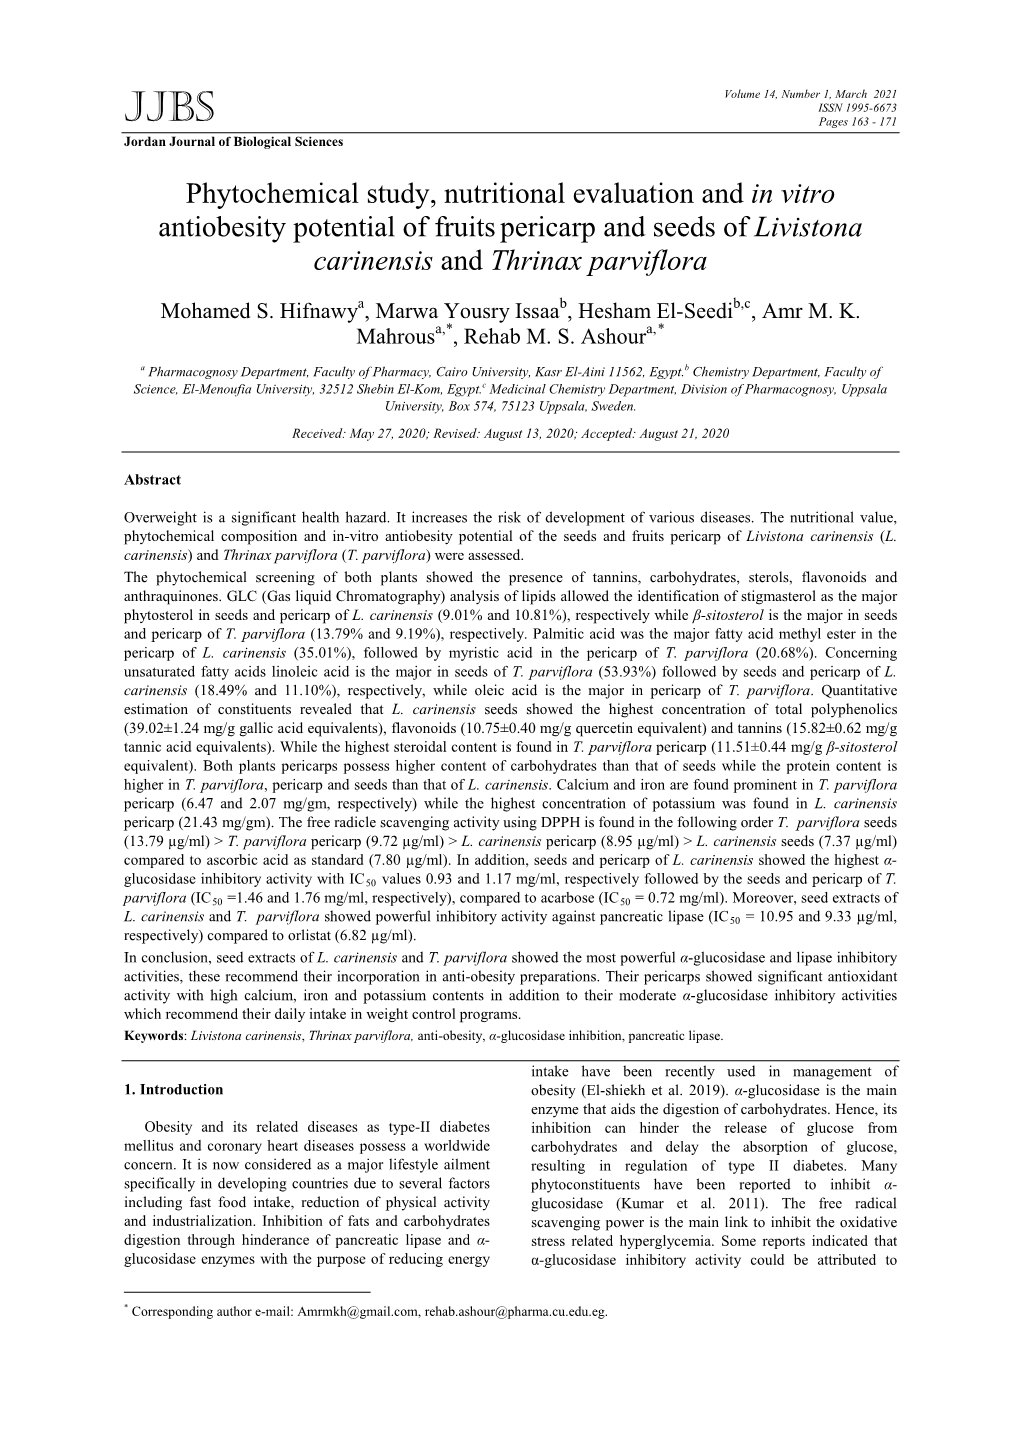 Phytochemical Study, Nutritional Evaluation and in Vitro Antiobesity Potential of Fruits Pericarp and Seeds of Livistona Carinensis and Thrinax Parviflora